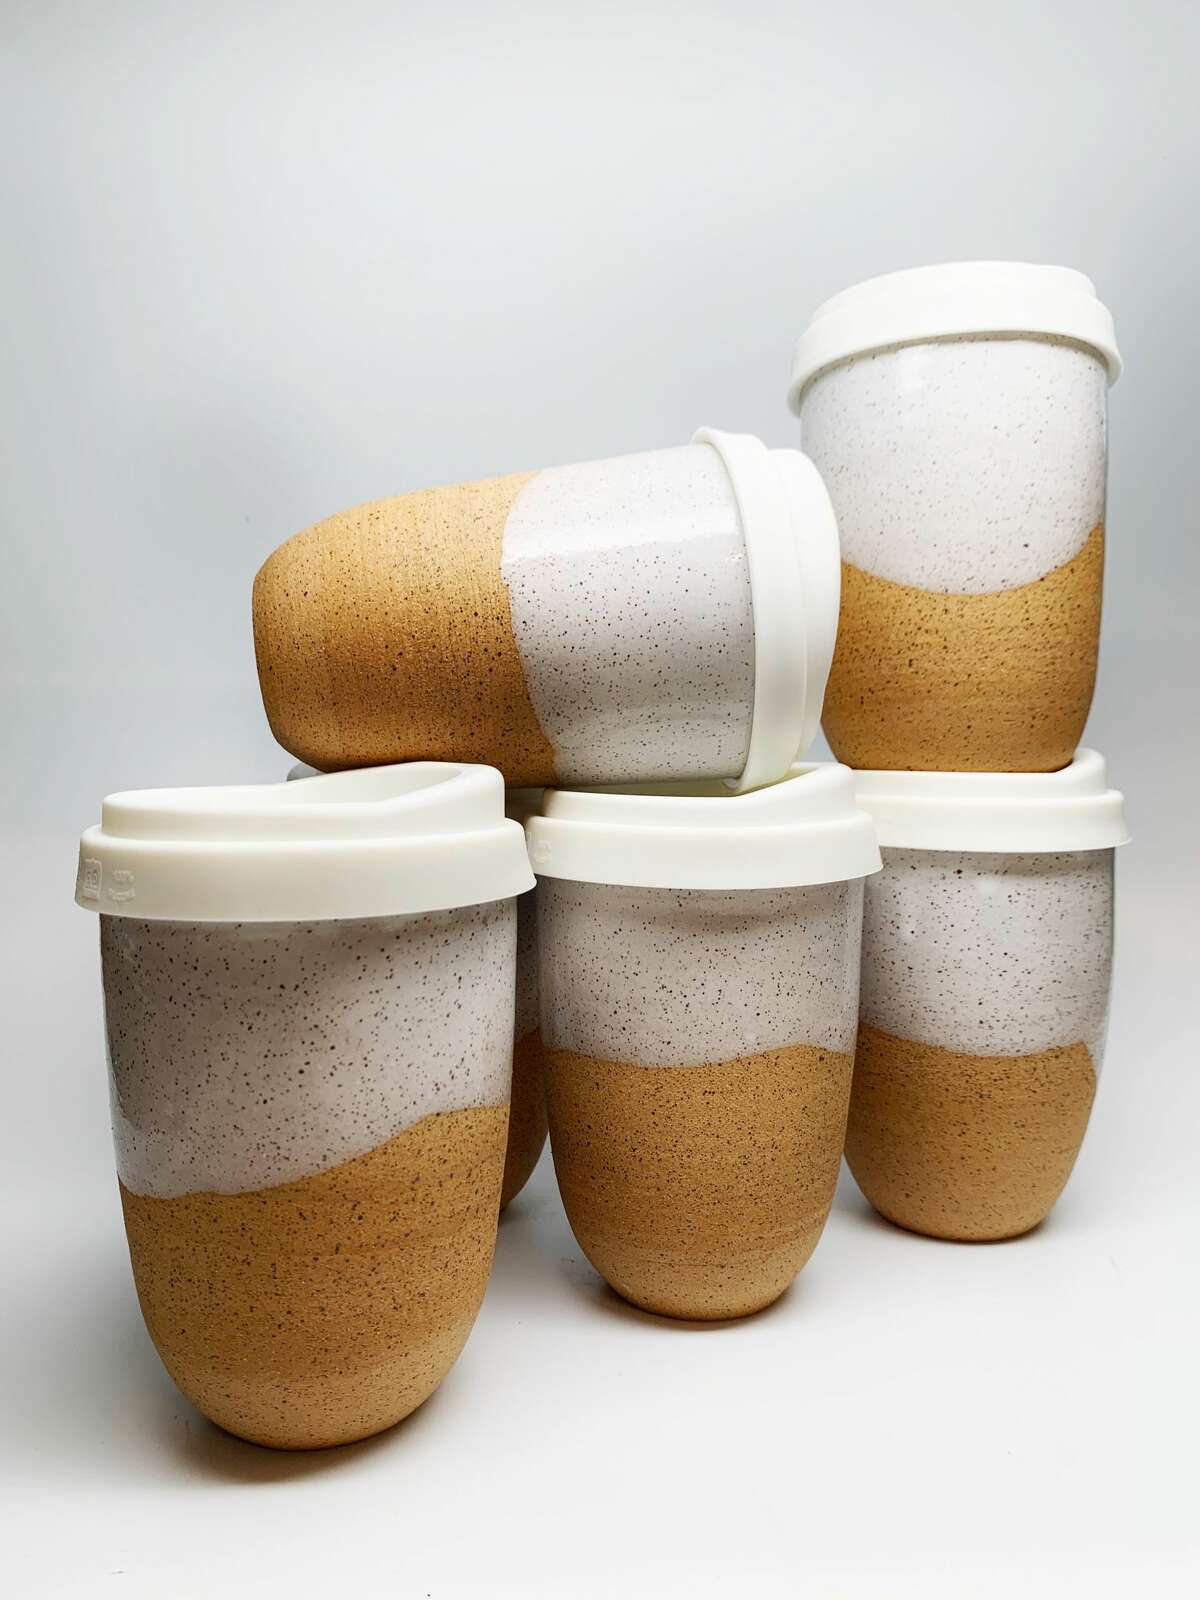 Milk & Honey swirl travel mugs from Rockwater Pottery in Ridgefield. Rockwater Pottery, Ridgefield  Products: Pottery Rockwater Pottery takes its inspiration from the landscape and classic farmhouses of New England where owner/artist Jaclyn Frances grew up. Her pottery is designed to easily blend into a variety of contemporary and classic homes by utilizing a neutral color palette and classic forms. Their rustic tones evoke a natural look but also remind the user of milk paint, hand hewn beams and wide plank floors of vintage barns. rockwaterpottery.com